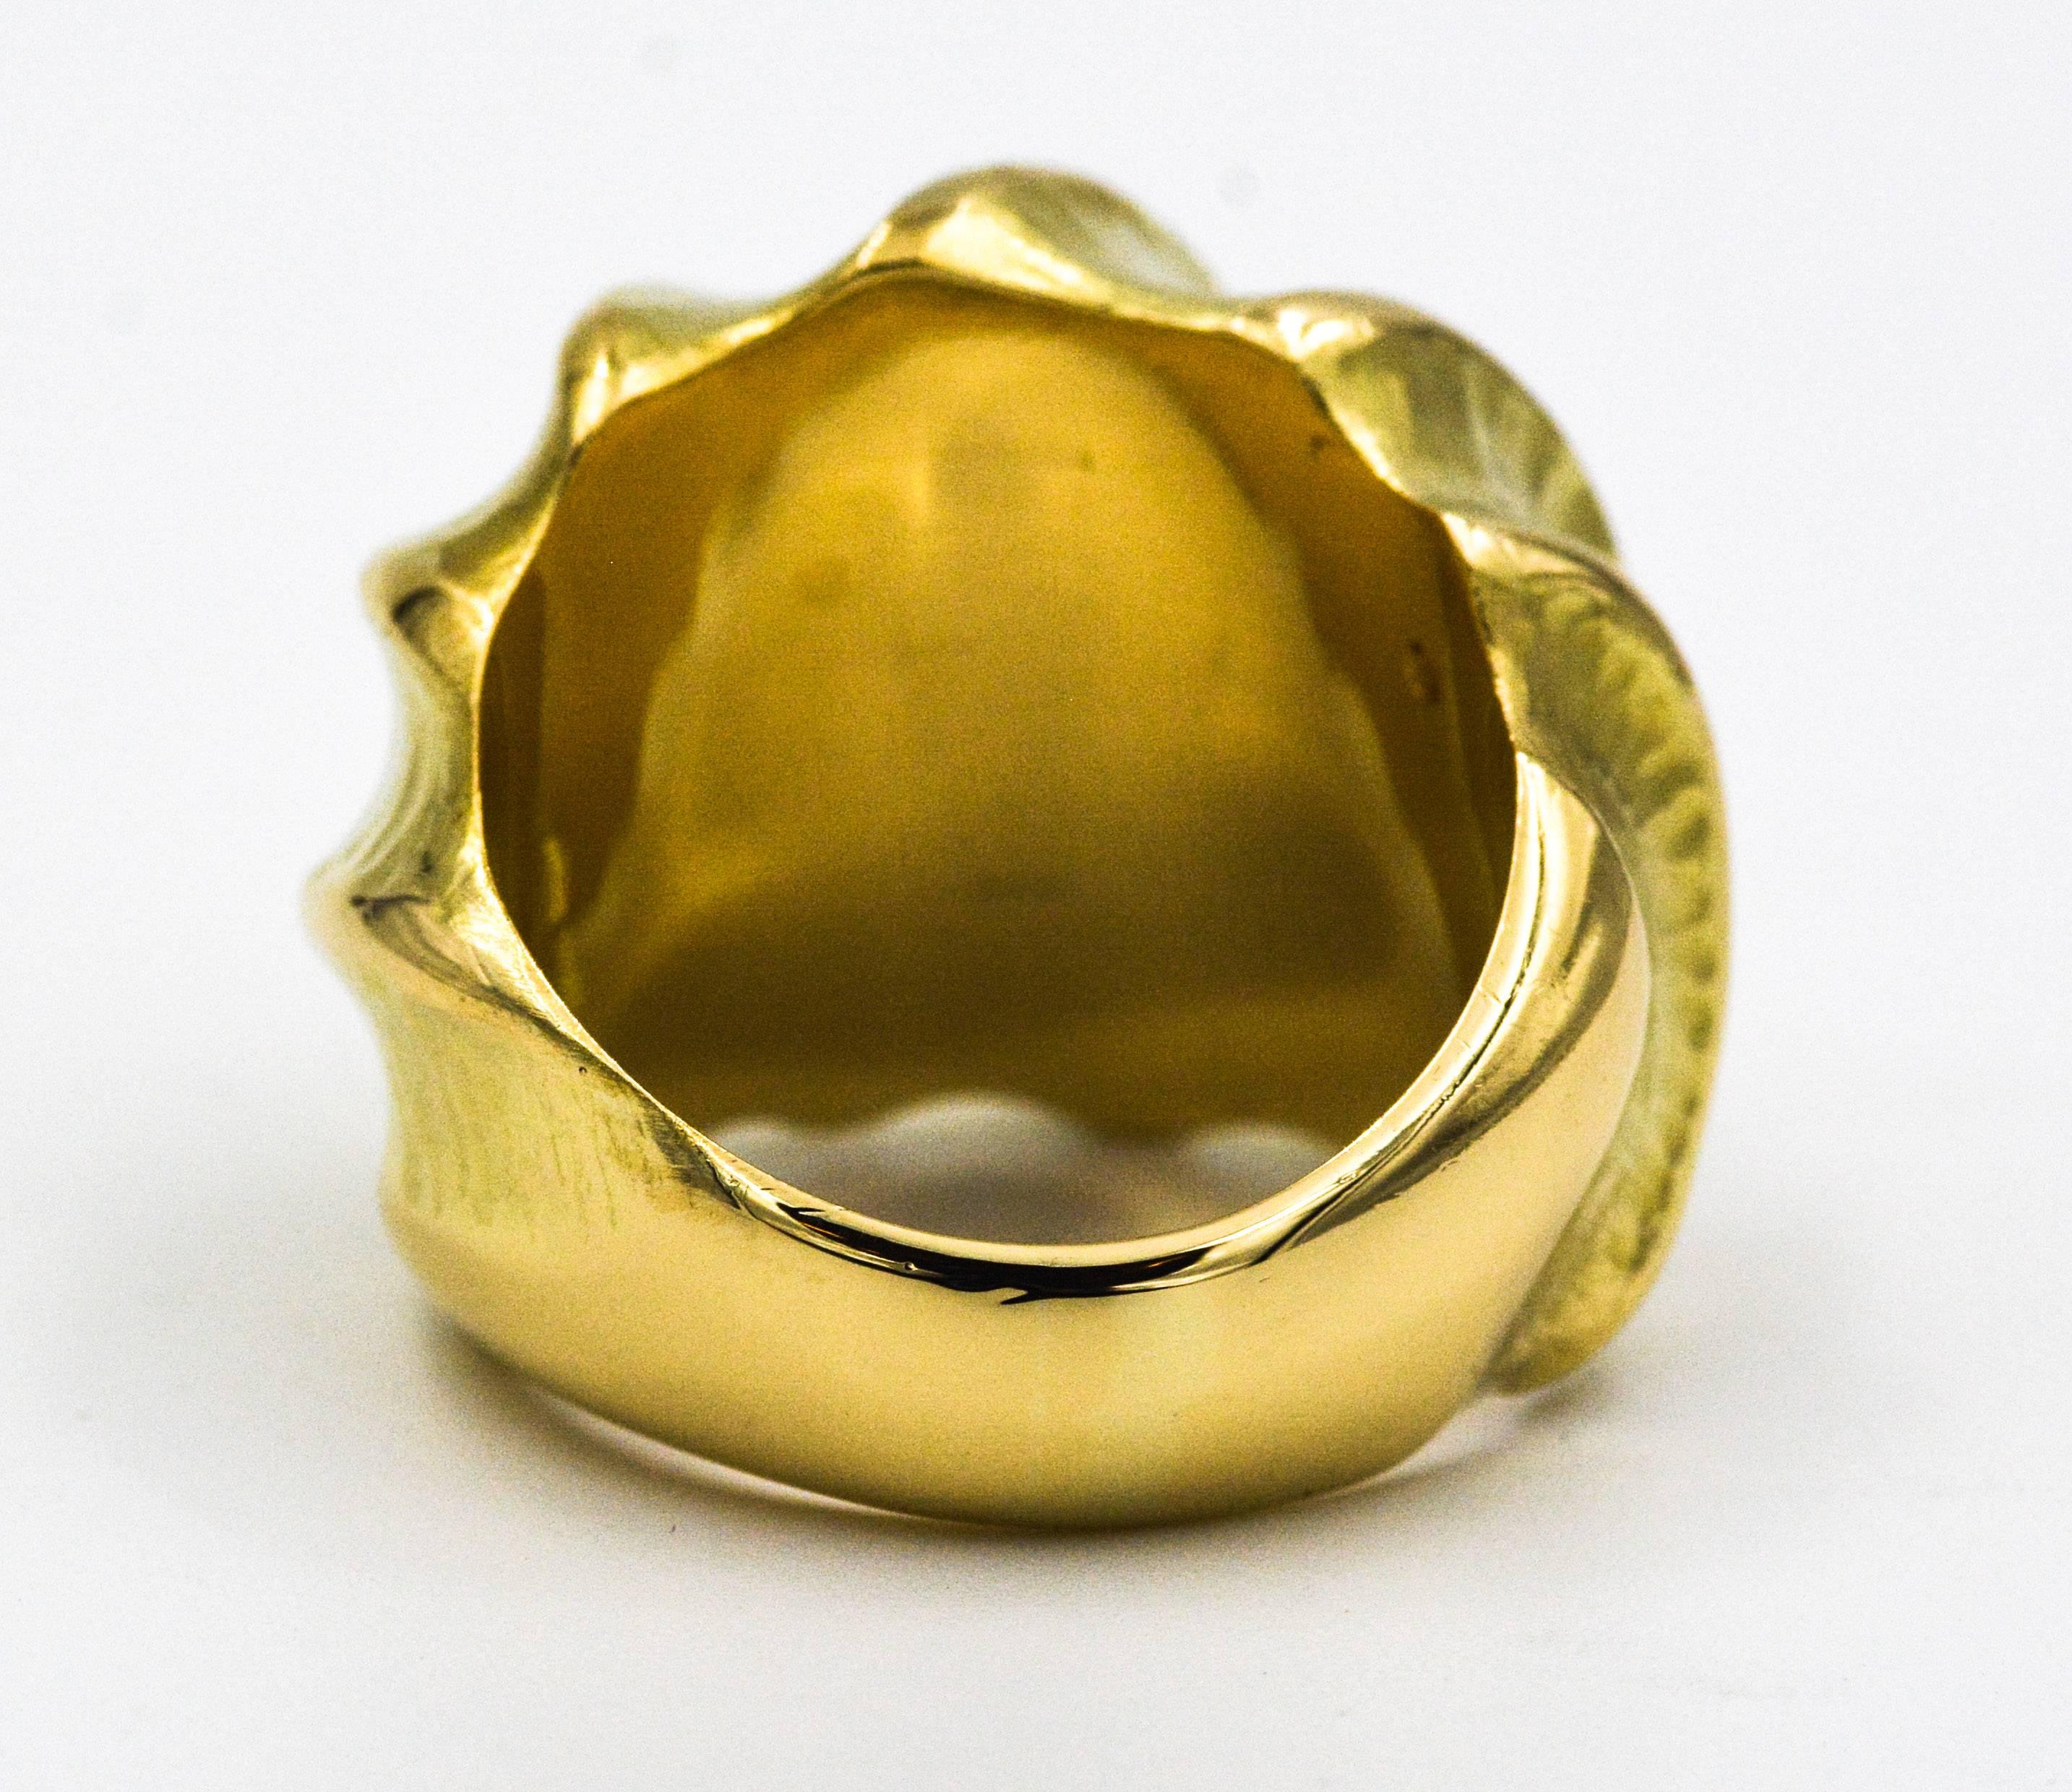 Hammered Valley High Polished Ridge Finished Yellow Gold Ring 1